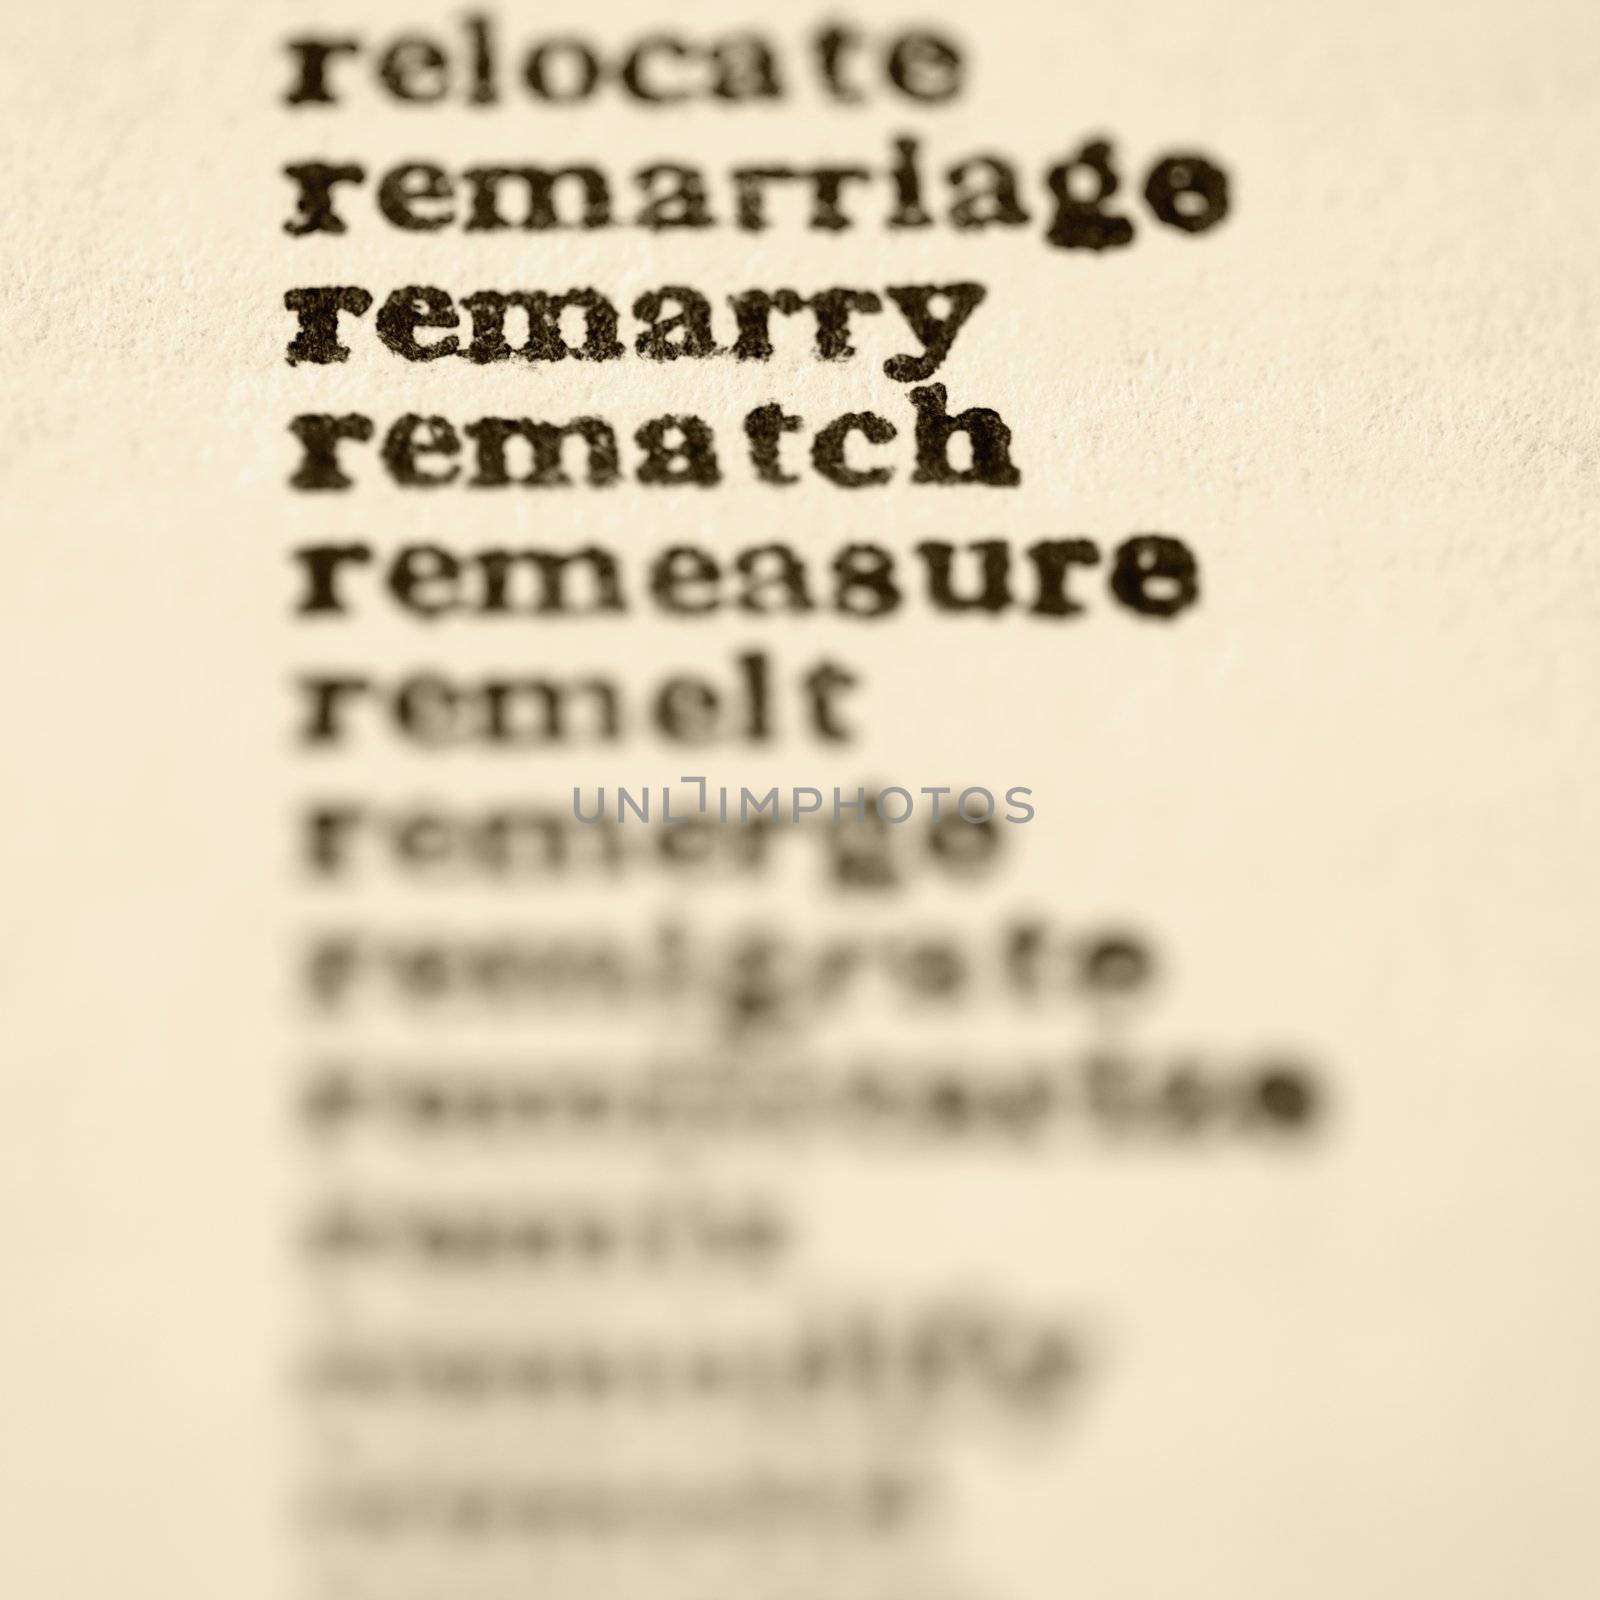 List of words starting with re by iofoto